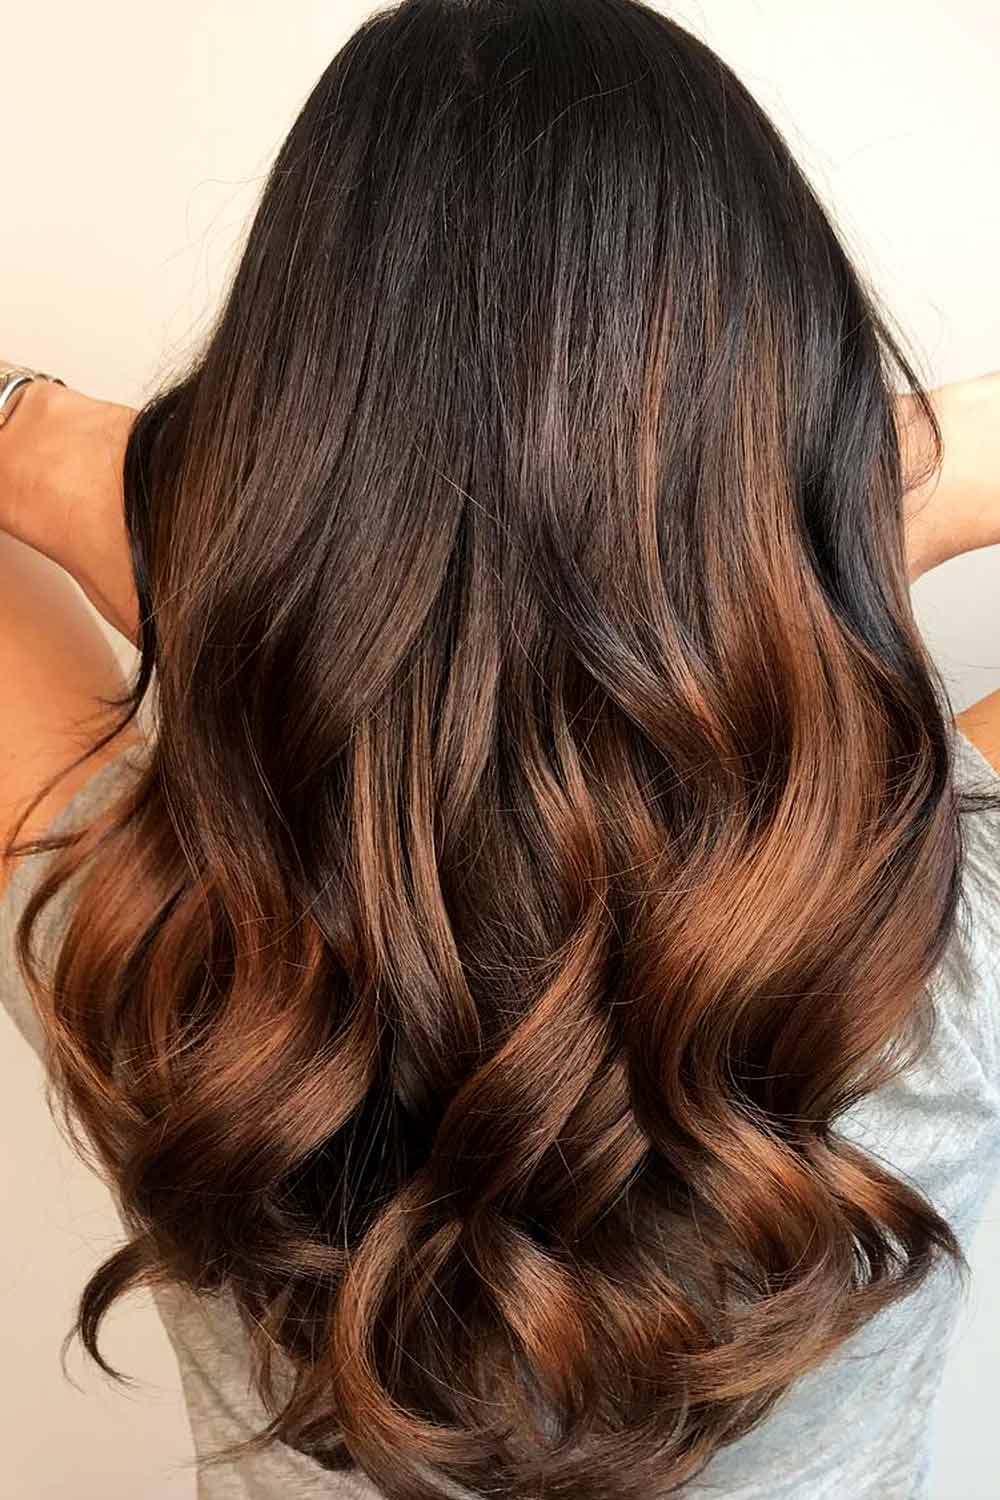 Toasted Toffee Hair #blackhairwithhighlights #hairwithhighlights